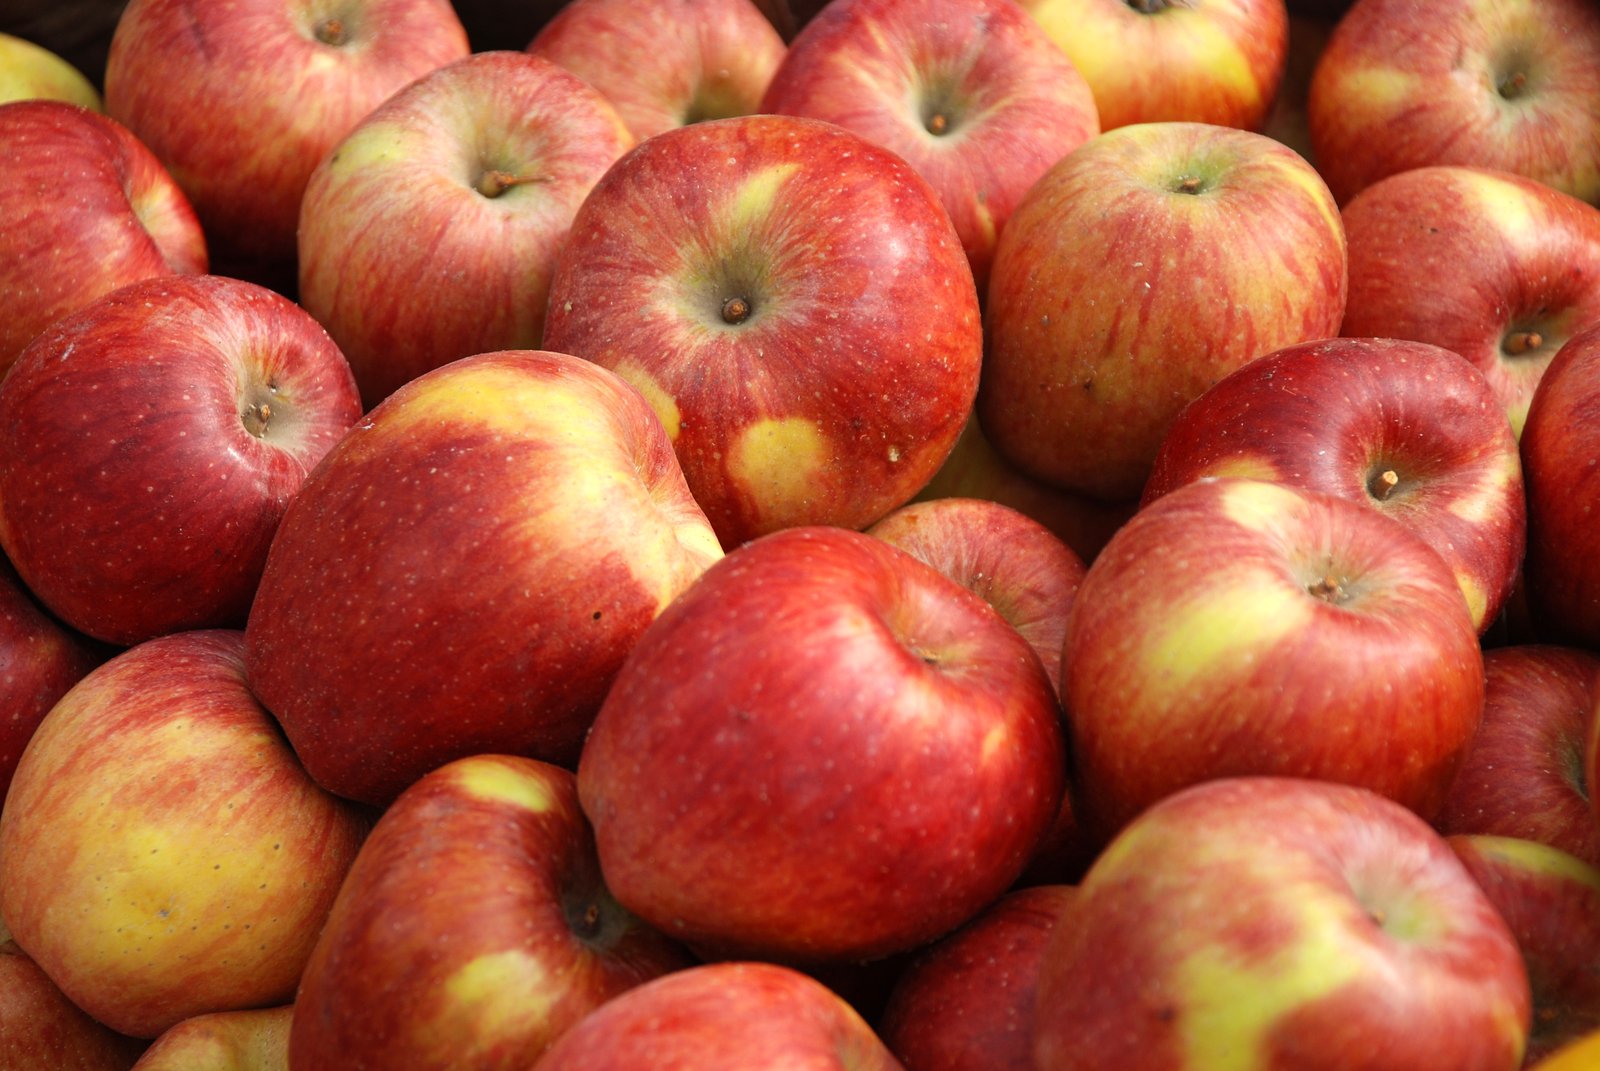 a close up view of many apples in the picture